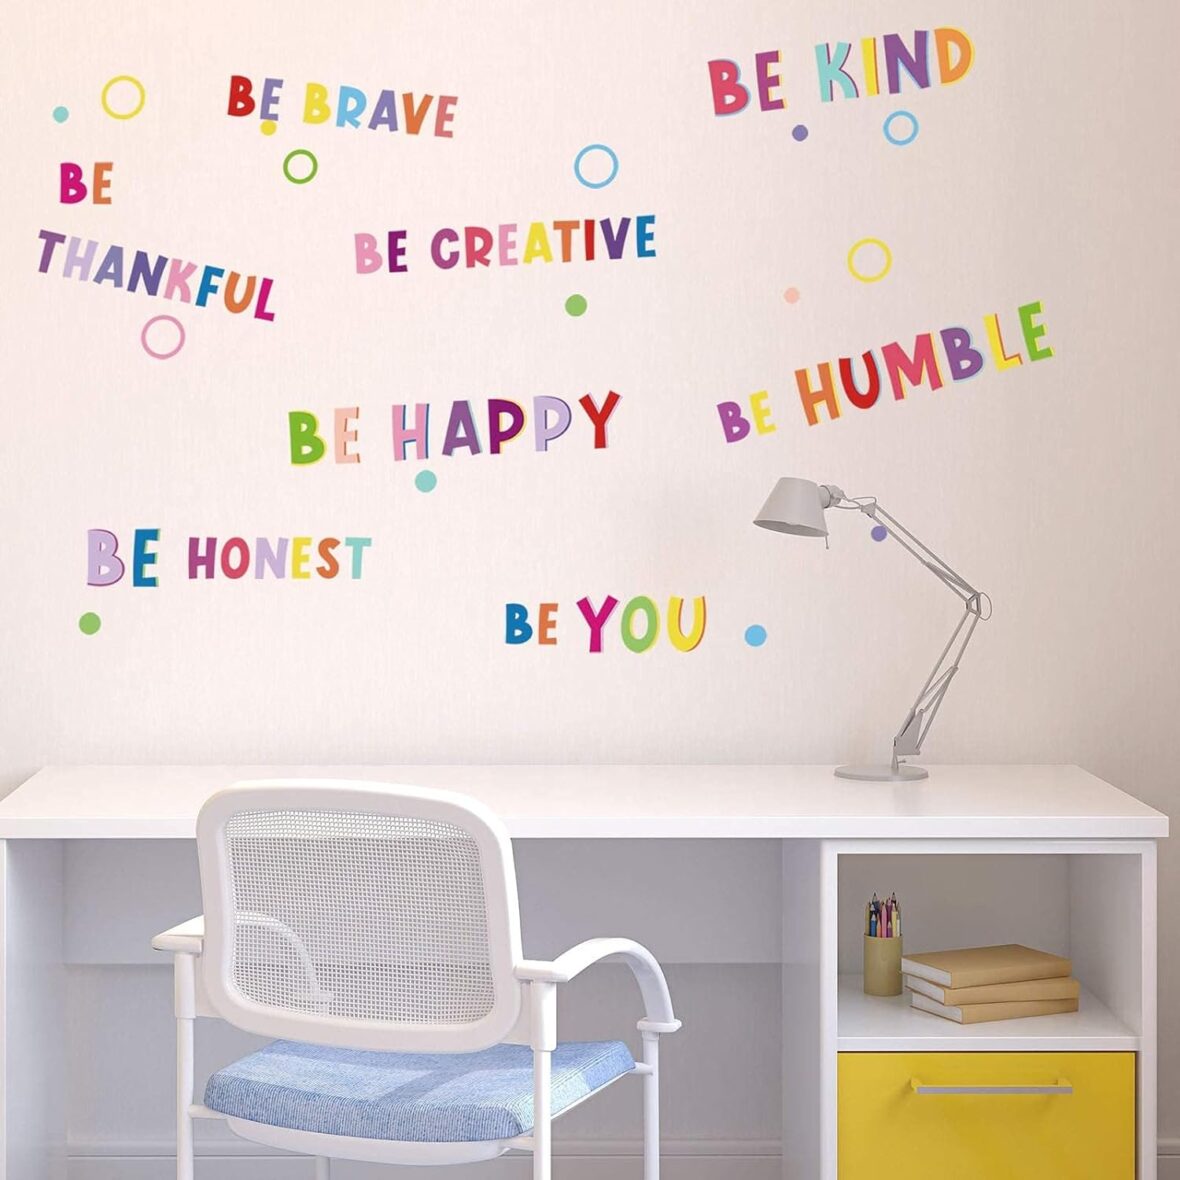 Motivational Phrases Stickers Inspirational Lettering Decals Be Thankful Be Creative Be Brave Decals for Classroom Nursery Kids Home Decoration